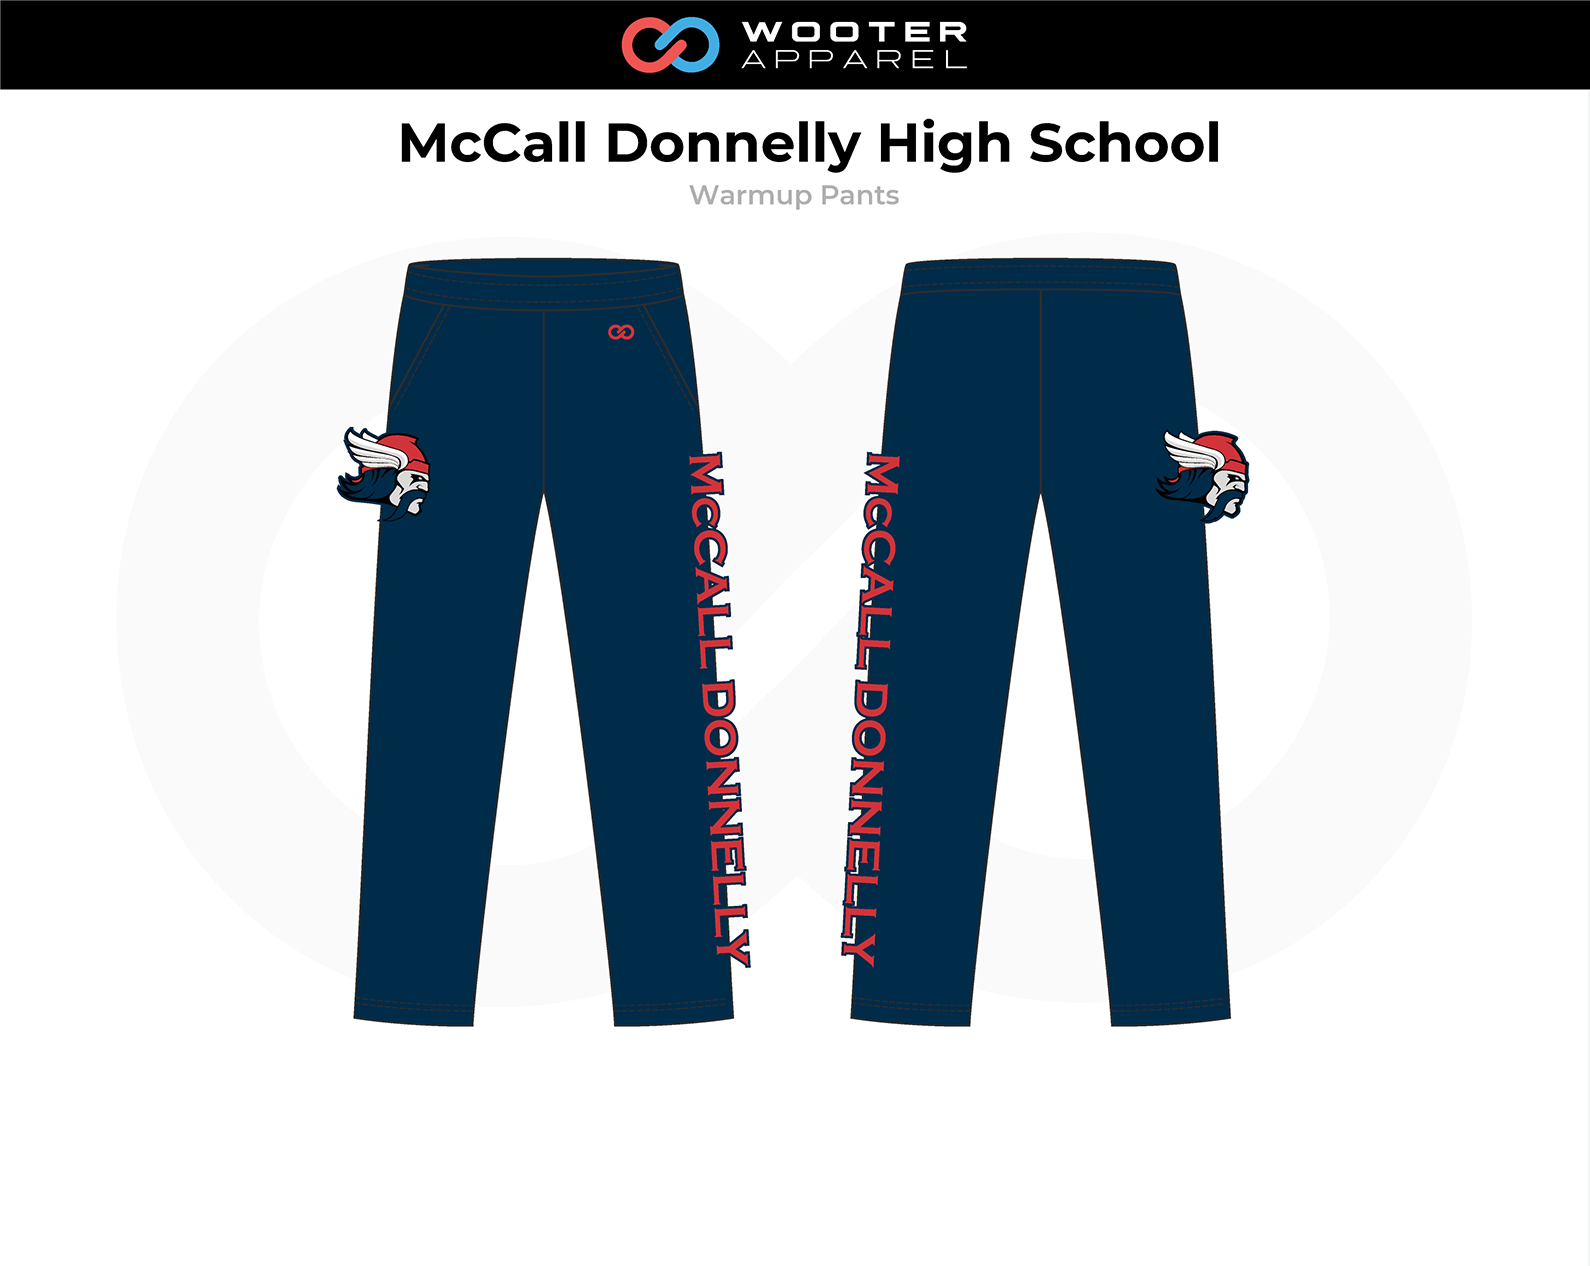 2018-10-25 McCall Donnelly High School Basketball (Golden Tigers) Warmup Pants.png